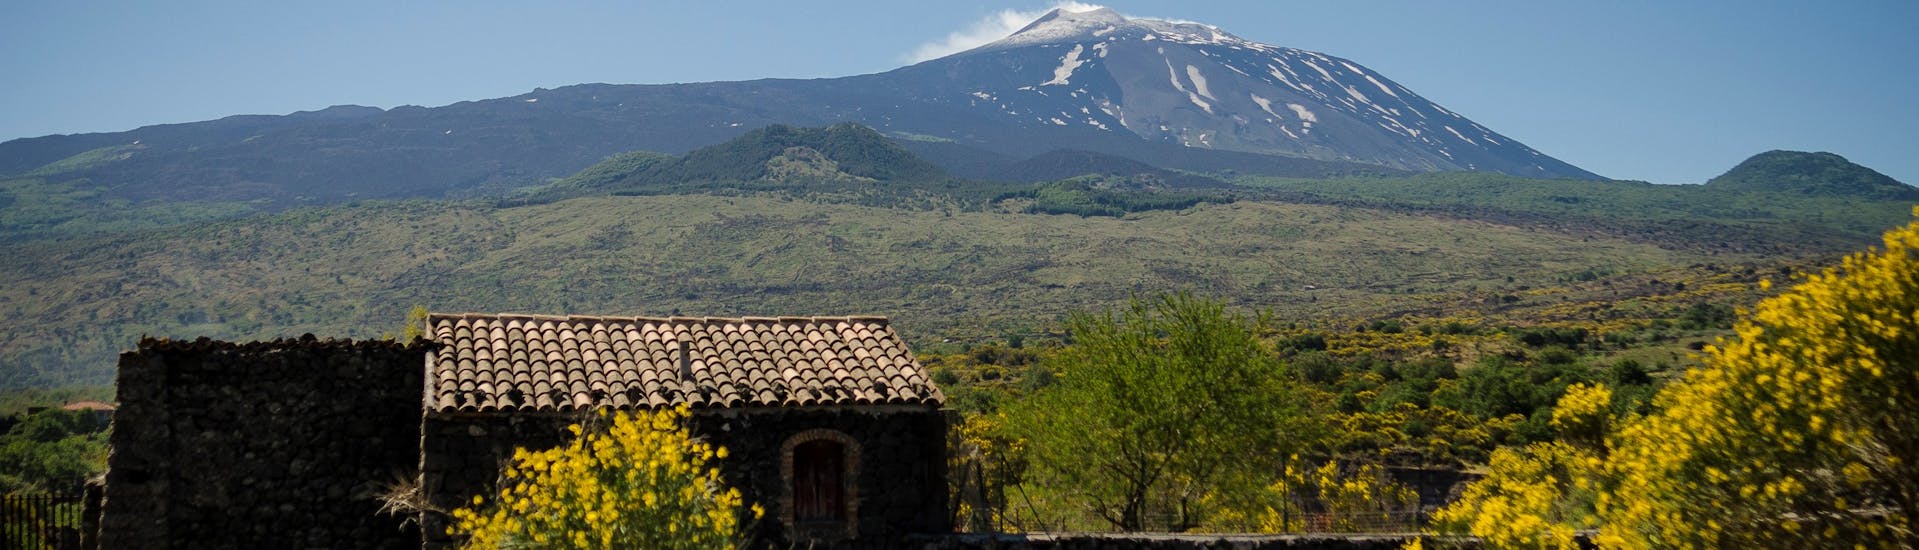 A house on the northern side of Etna during the Excursion to Mount Etna, Randazzo and the Alcantara Gorges with SAT Excursion Taormina.